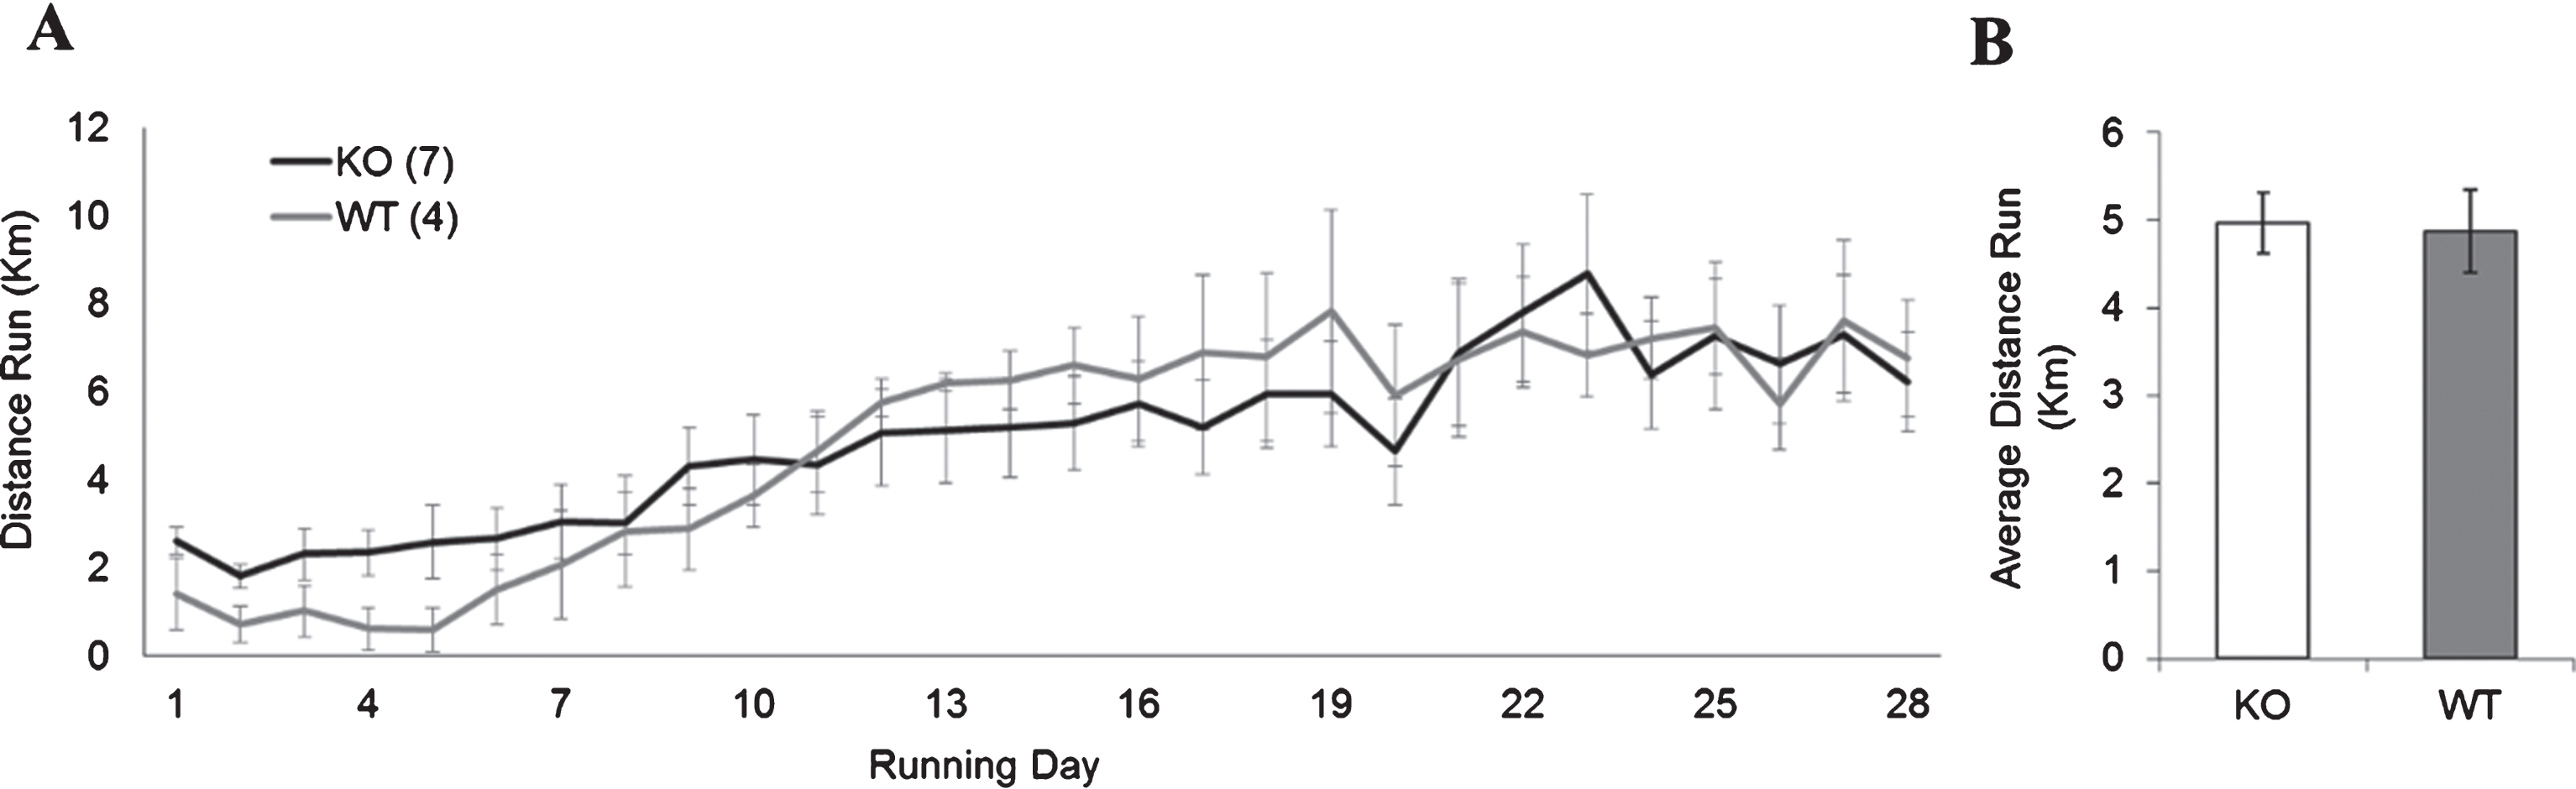 WT and FMR1 KO running performance. (A) Average daily distance run (in km) per day for animals given access to an unlocked running dish for 28 days continuously. (B) There was no statistically significant differences in total average distance run between WT and Fmr1 KO mice.